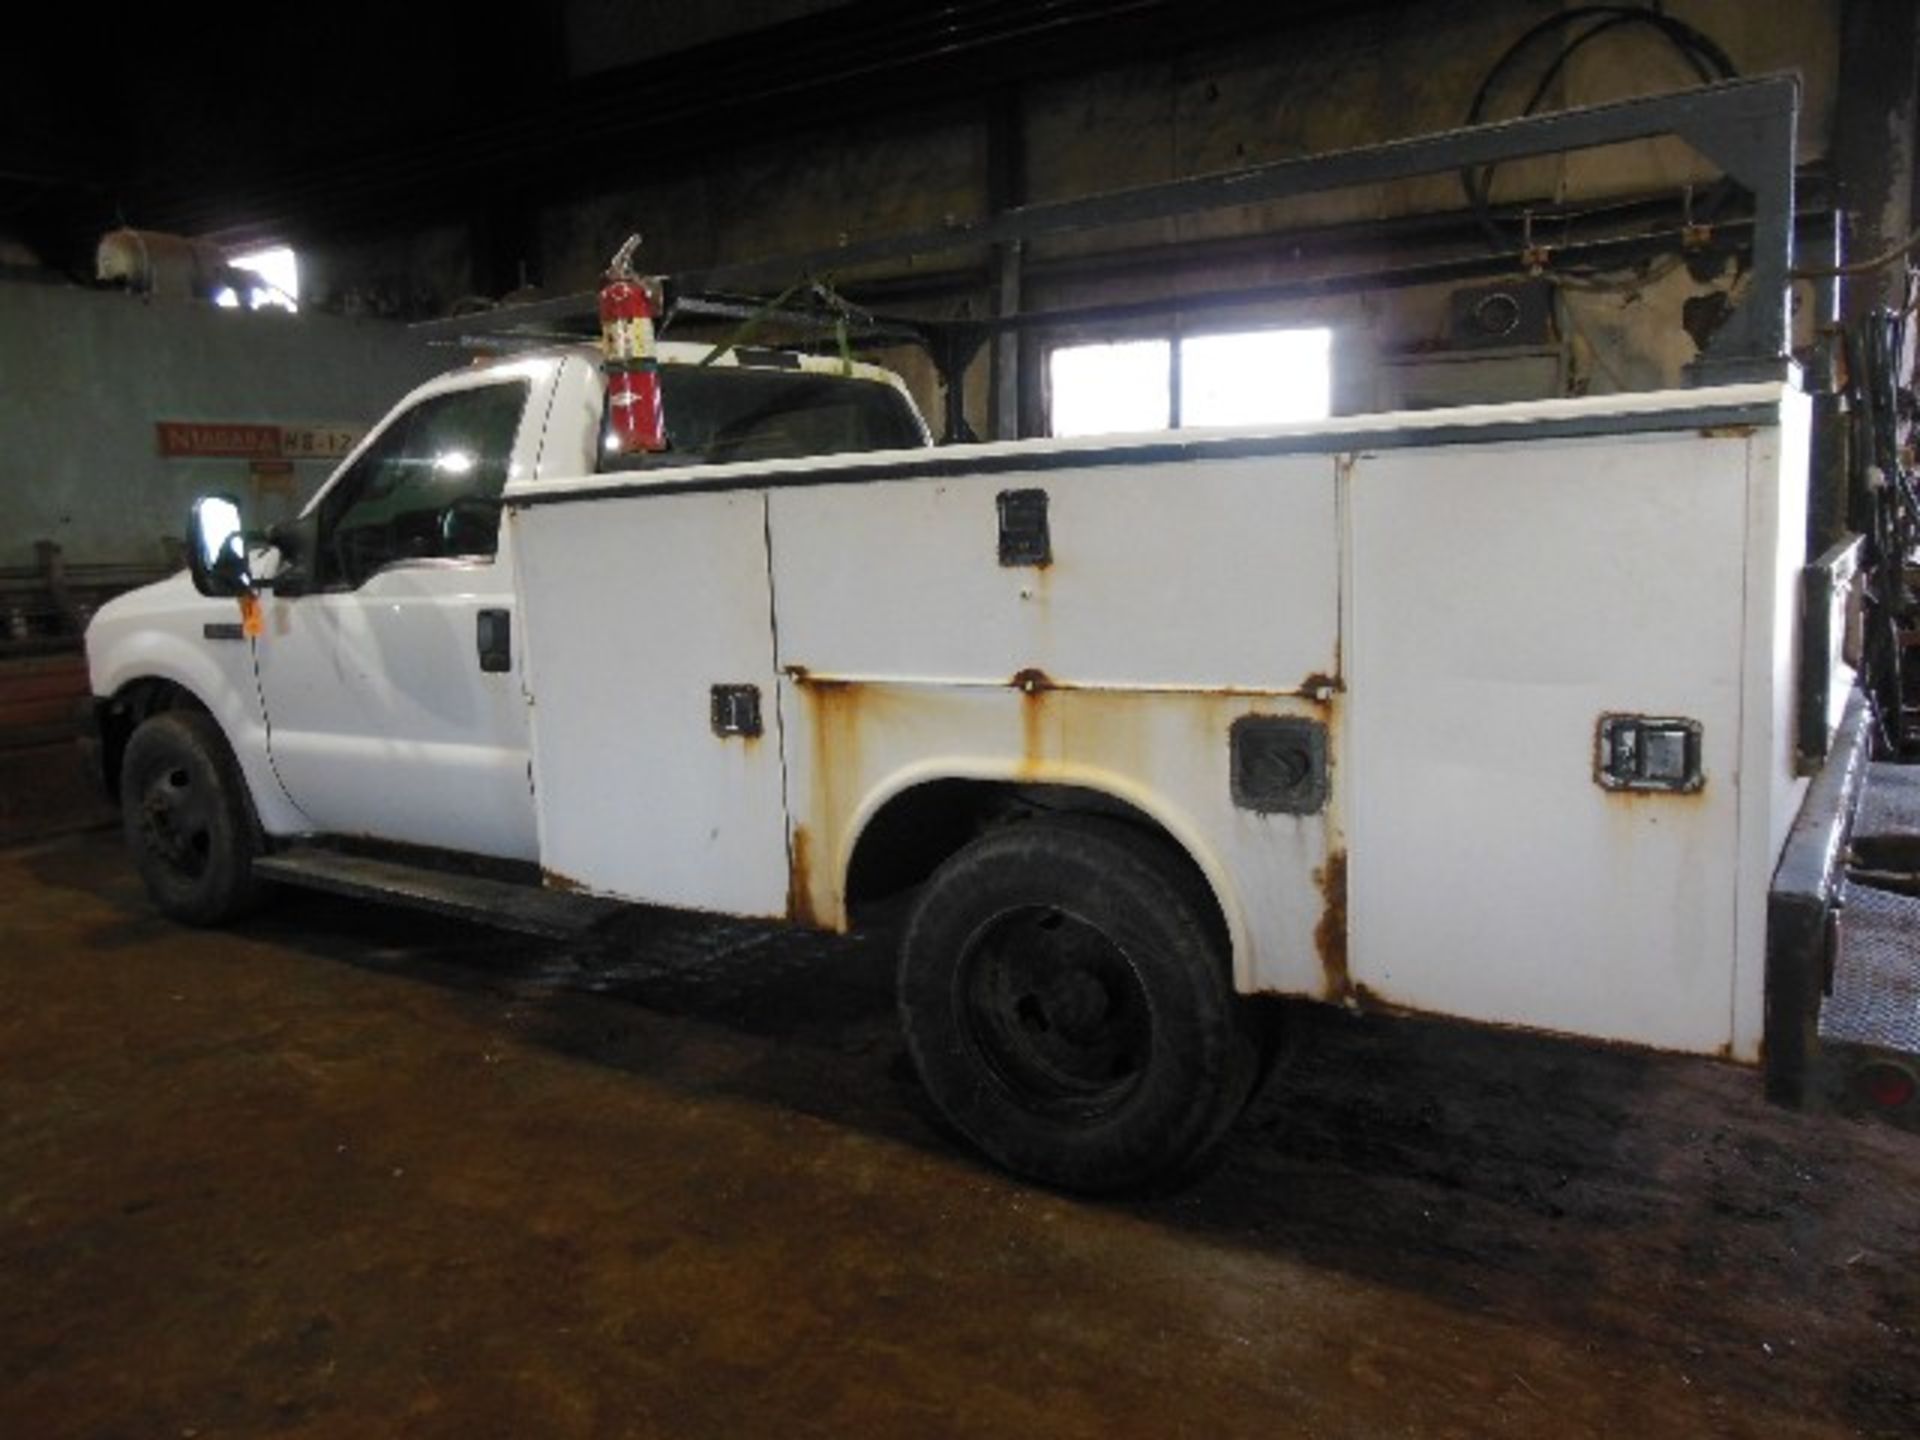 2005 FORD F350 TRUCK WITH UTILITY BODY VIN#1FDWF3650EB45106